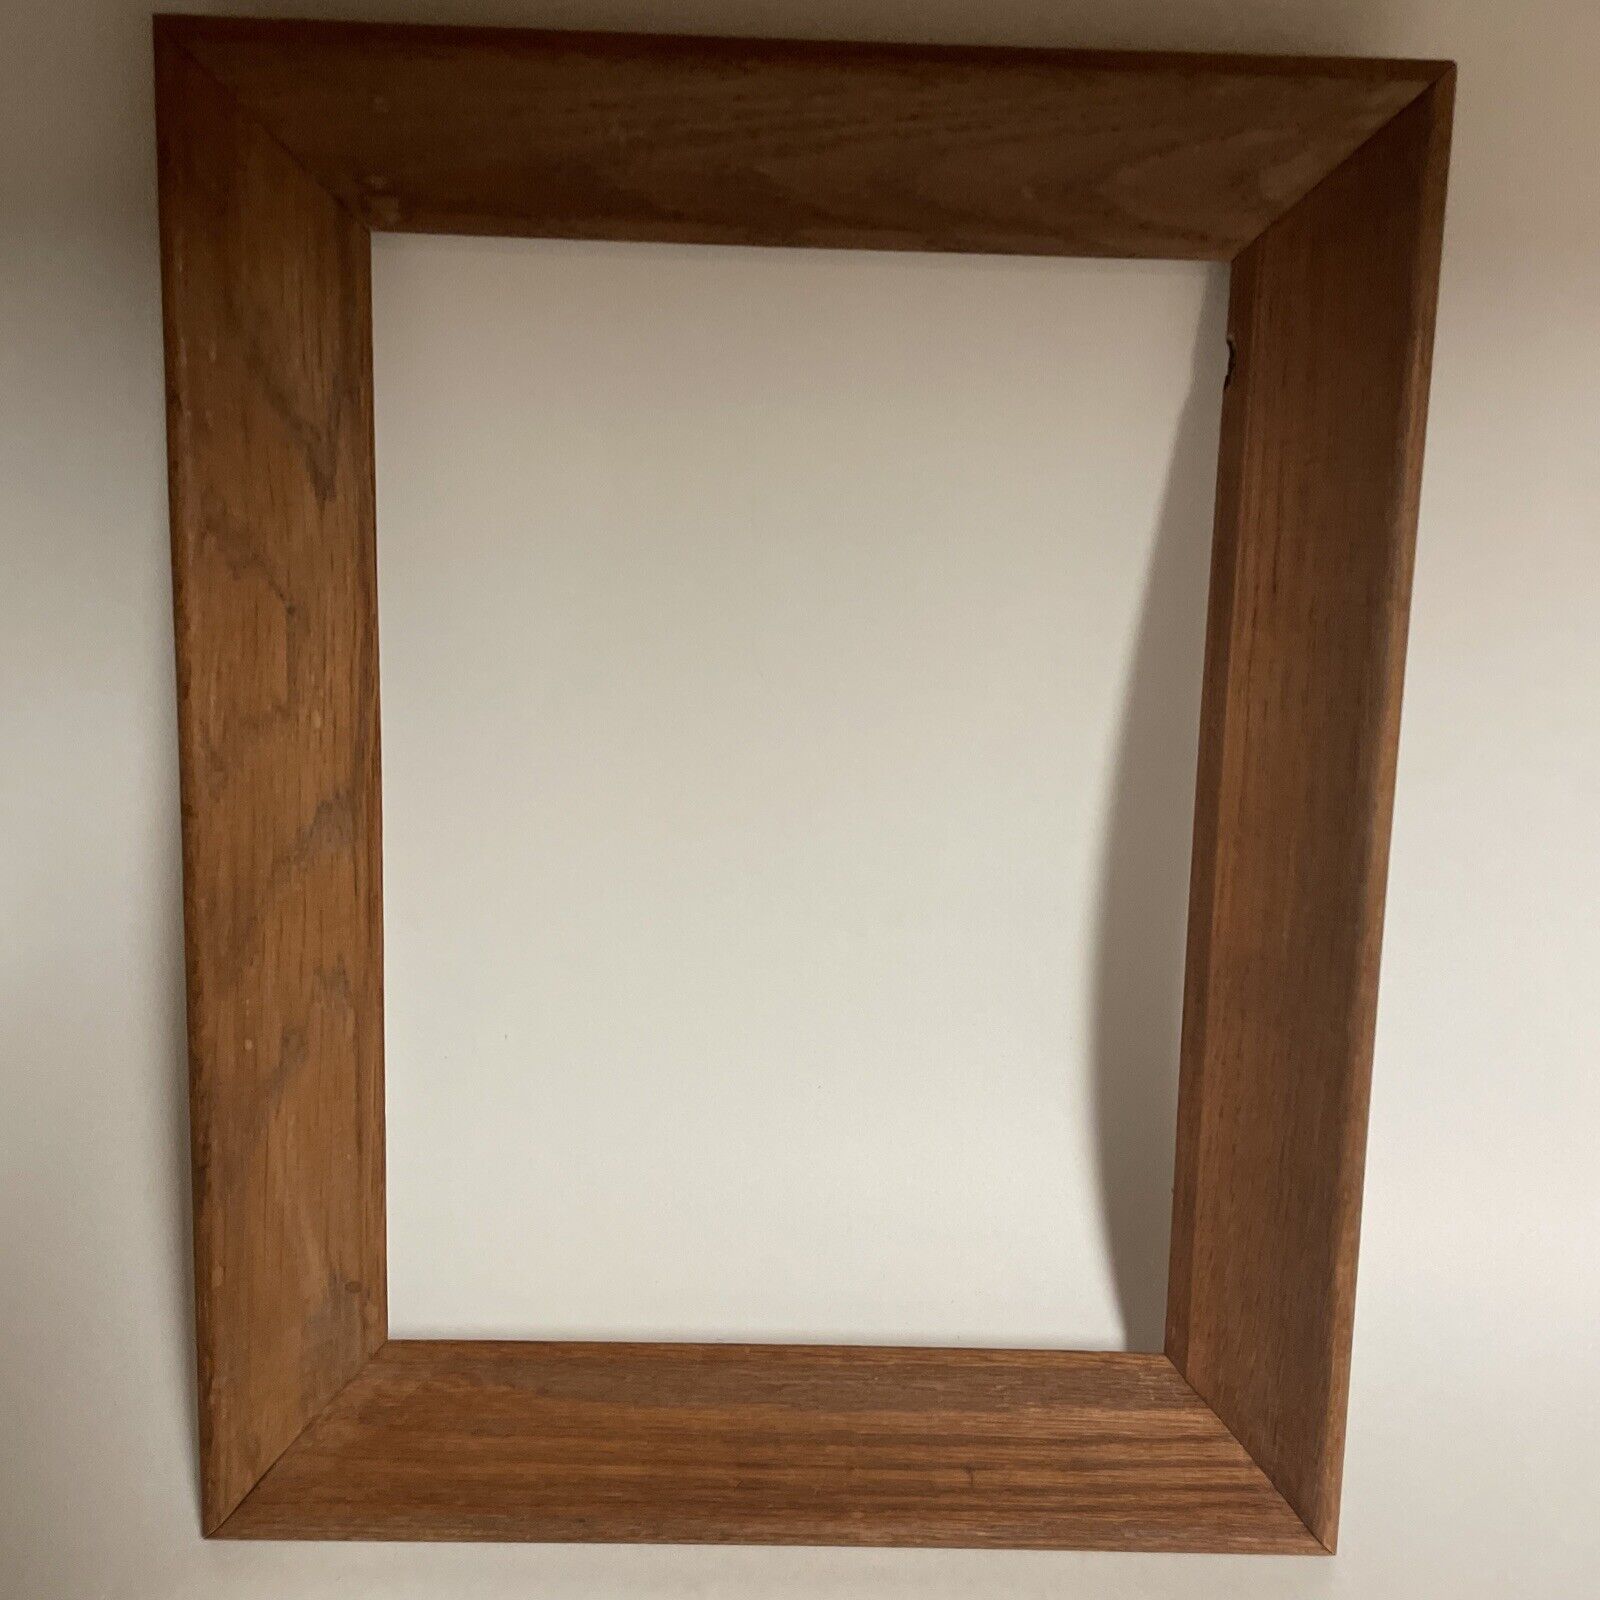 VTG 1960's-70's Solid Wood Deep Picture Frame, 14.75 X 12” X 2.5”W